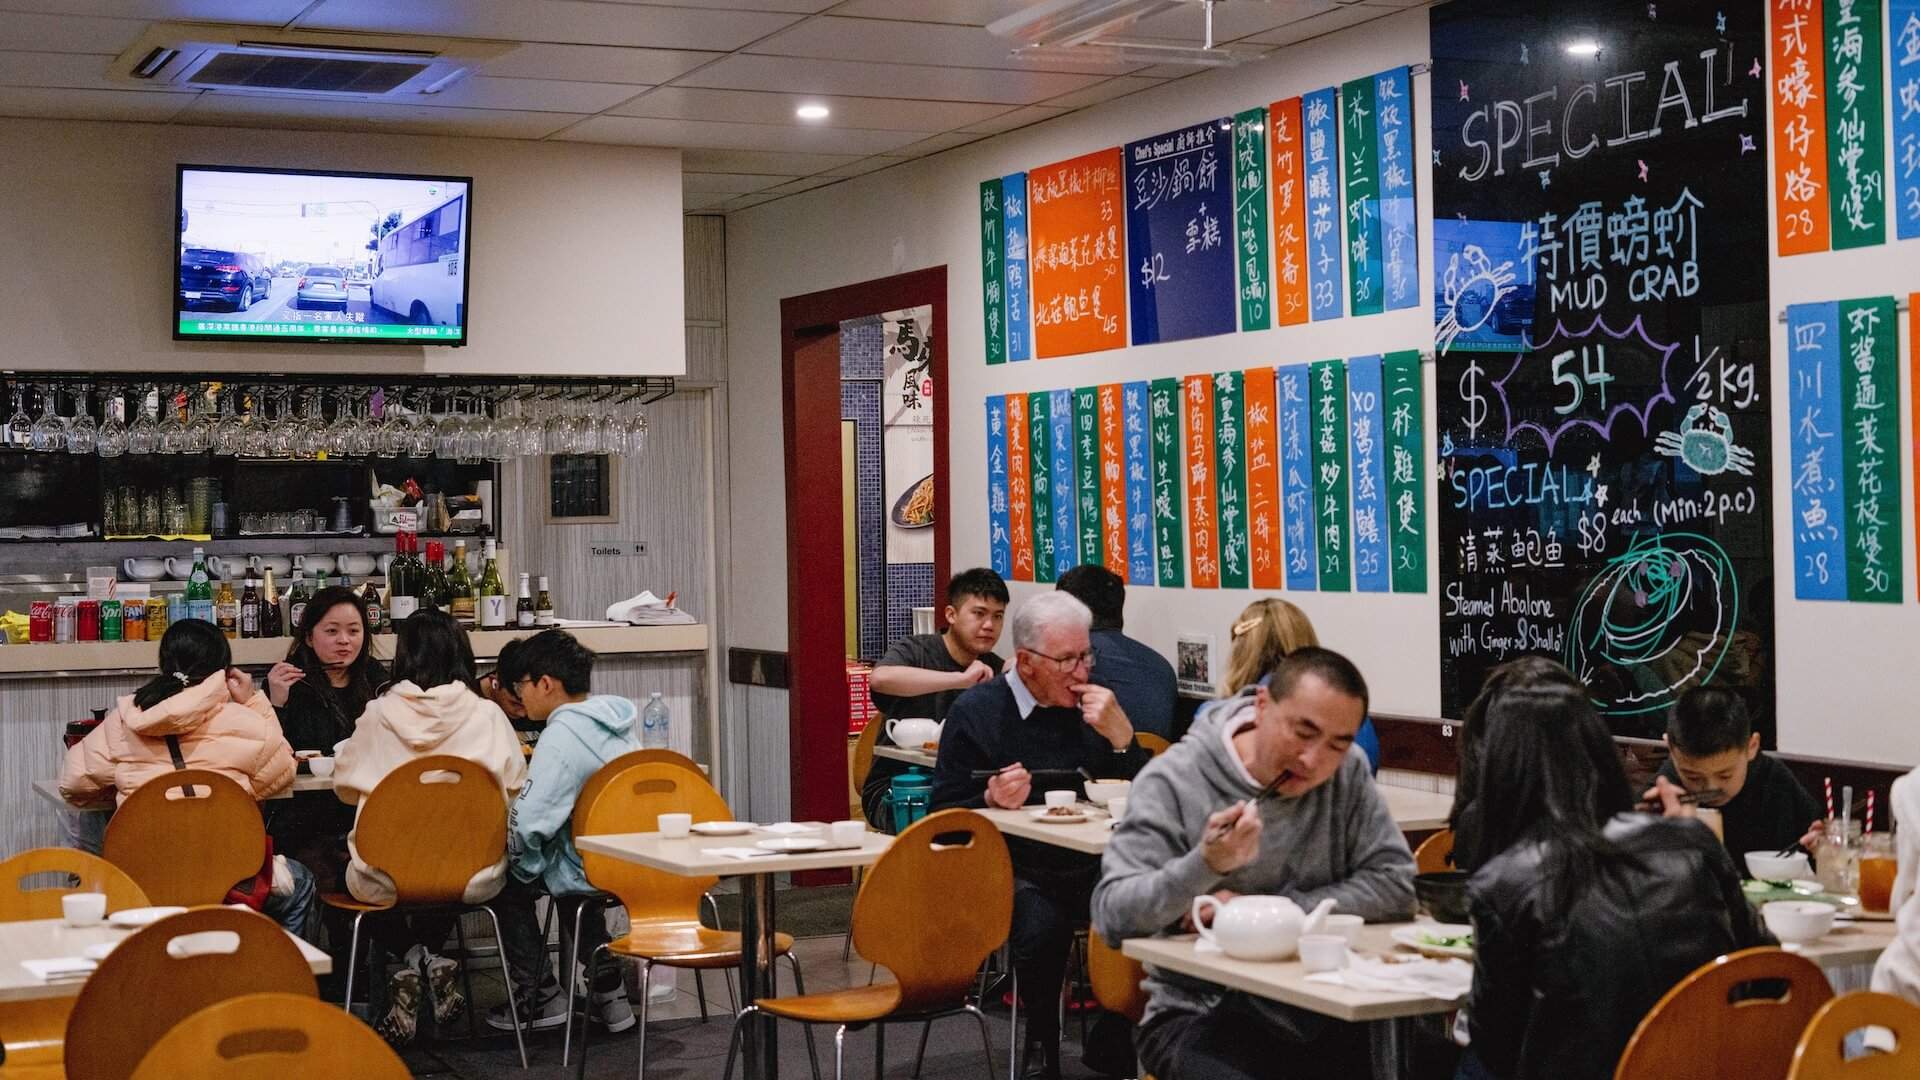 Dining room at Pacific House BBQ - one of the best seafood restaurants in Melbourne.